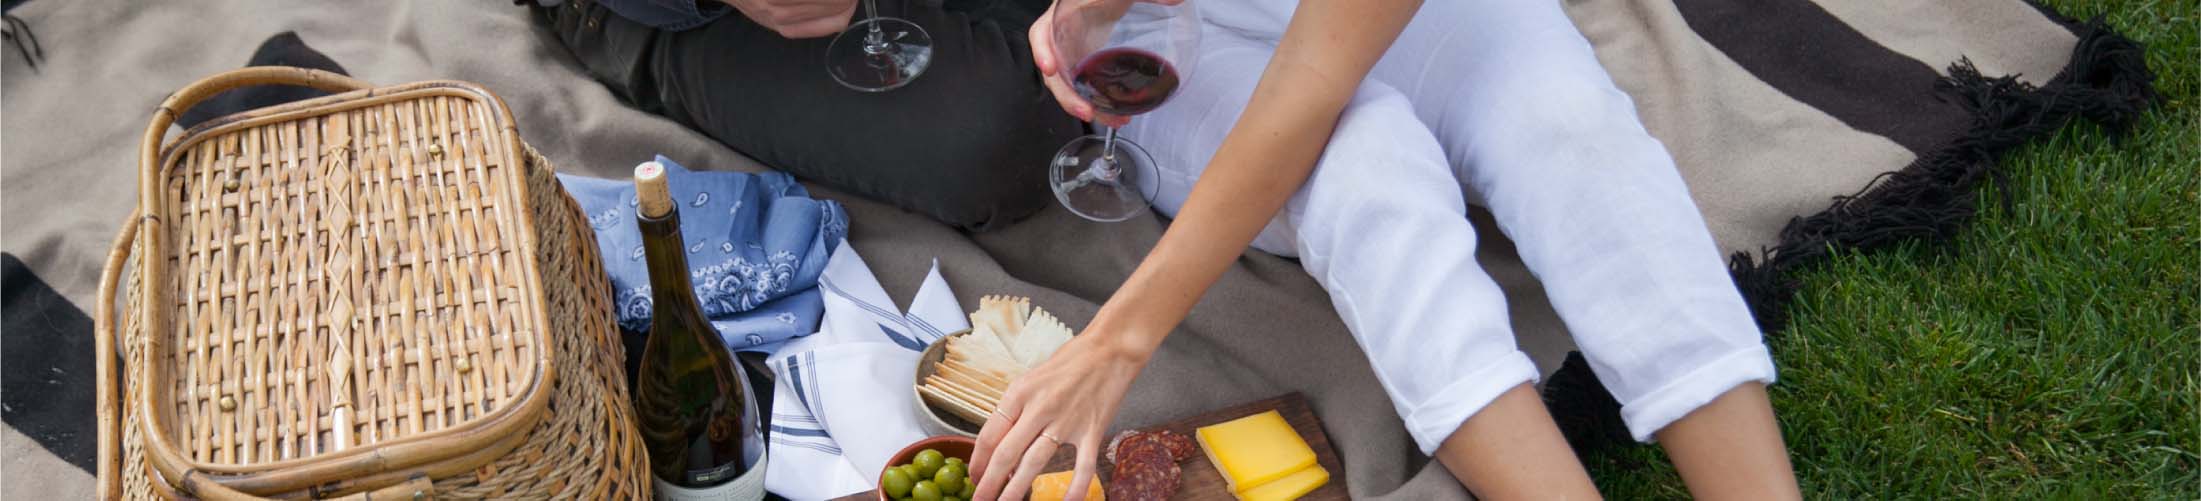 A picnic basket, bottle of wine and charcuterie board.